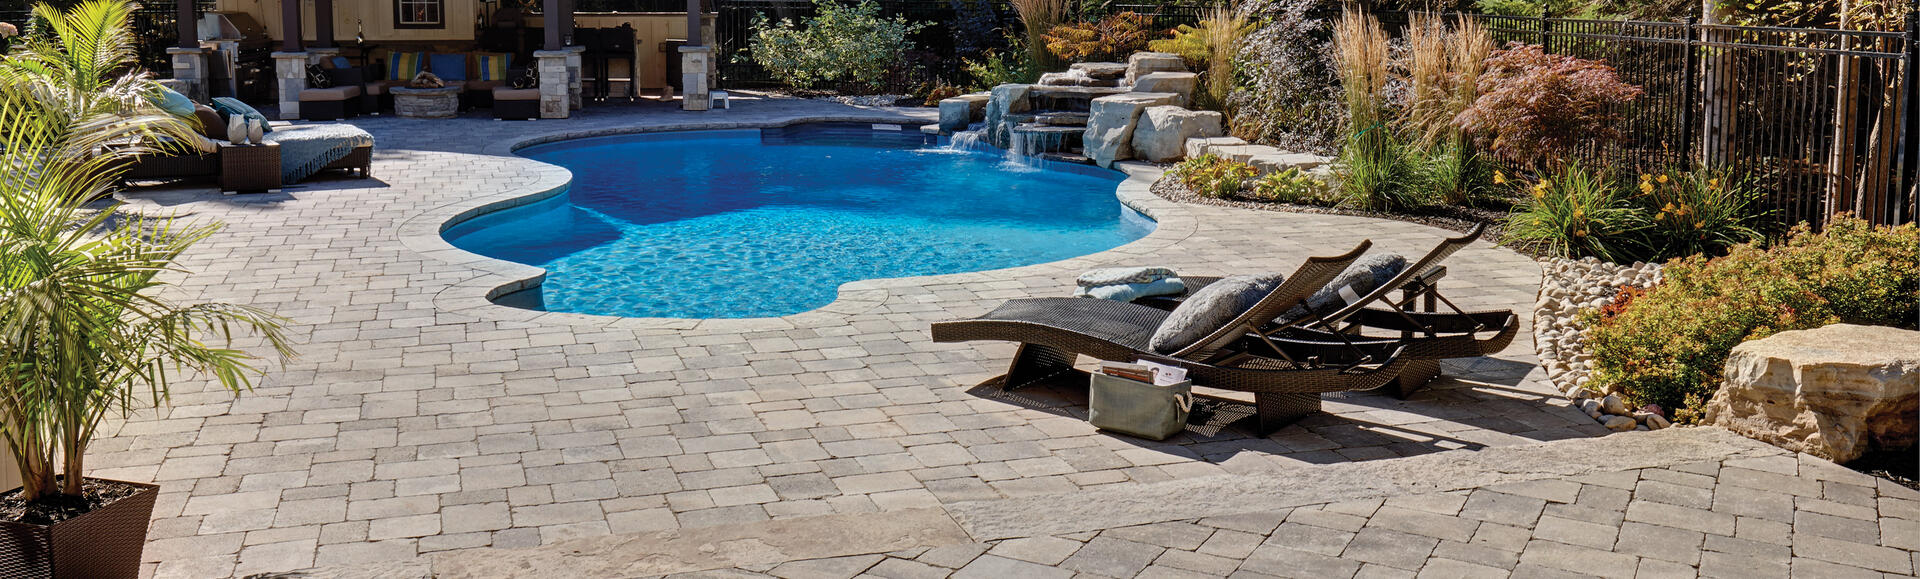 Patio with pool using Colonnade products from Brampton Brick